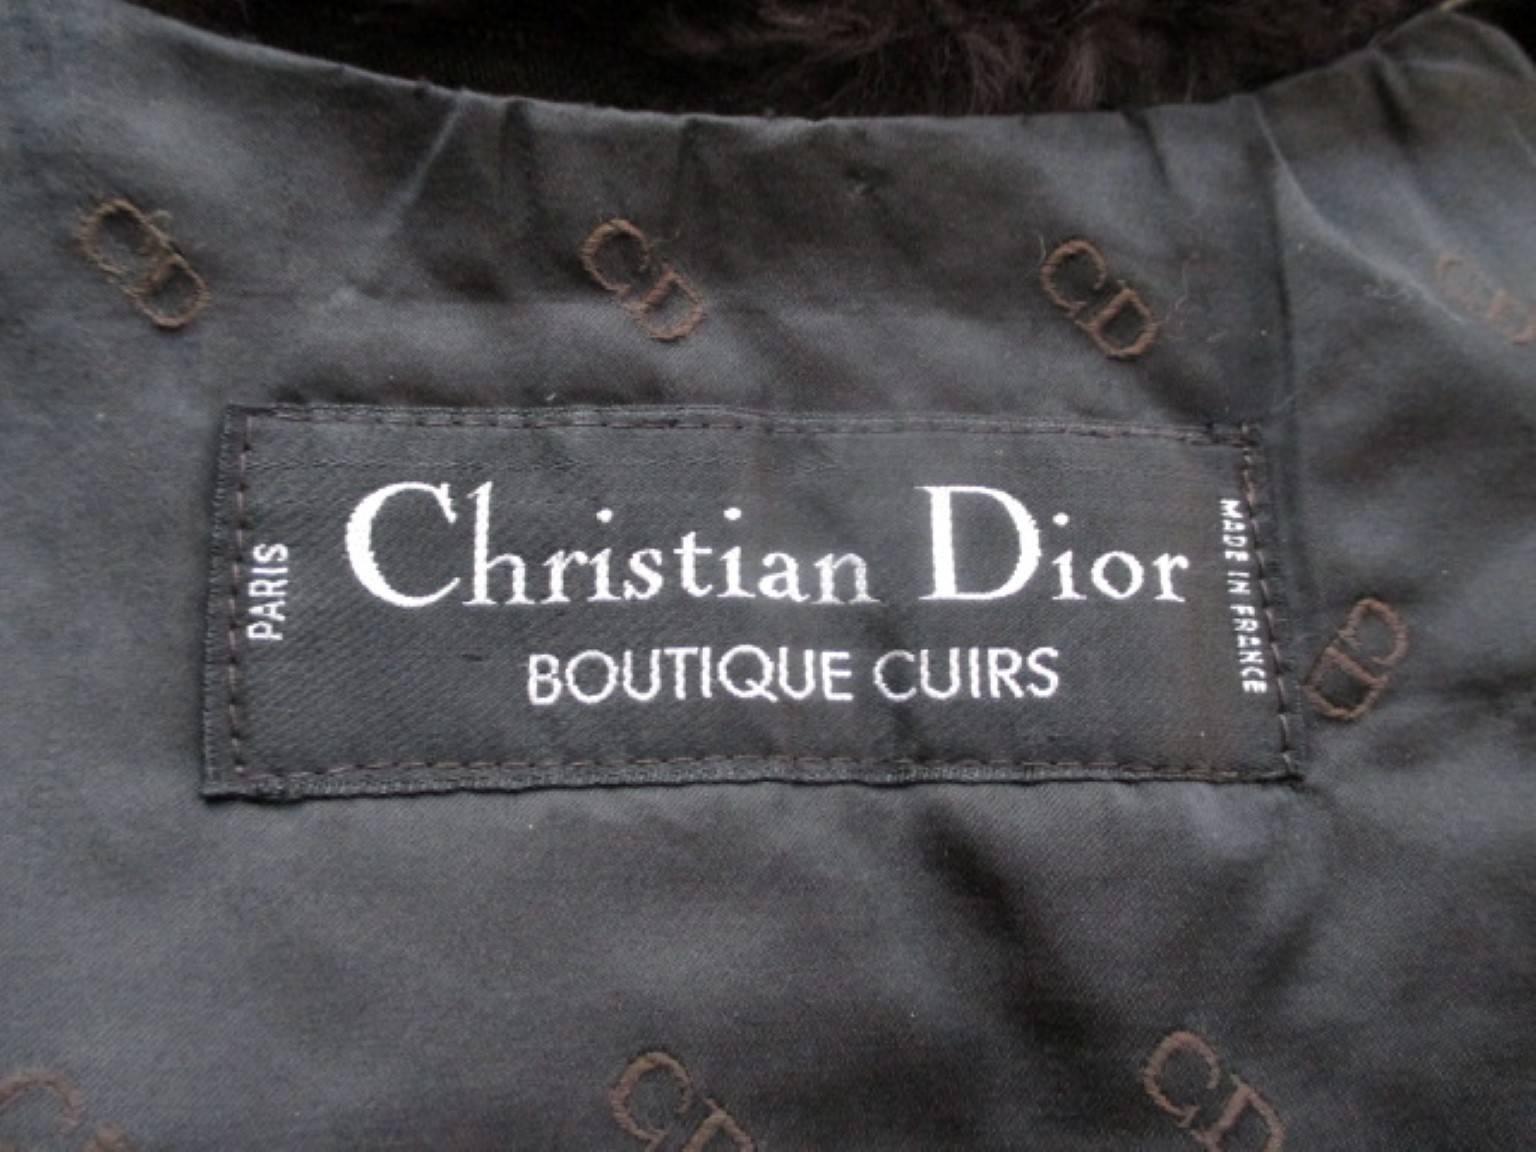 This Dior jacket is made from brown sheared fur with leather.
It has a belt, closing with a zipper and 4 snaps and has 2 pockets.
It is from Christian Dior boutique cuirs.
This vintage coat  is well worn and has a little condition issue with one of